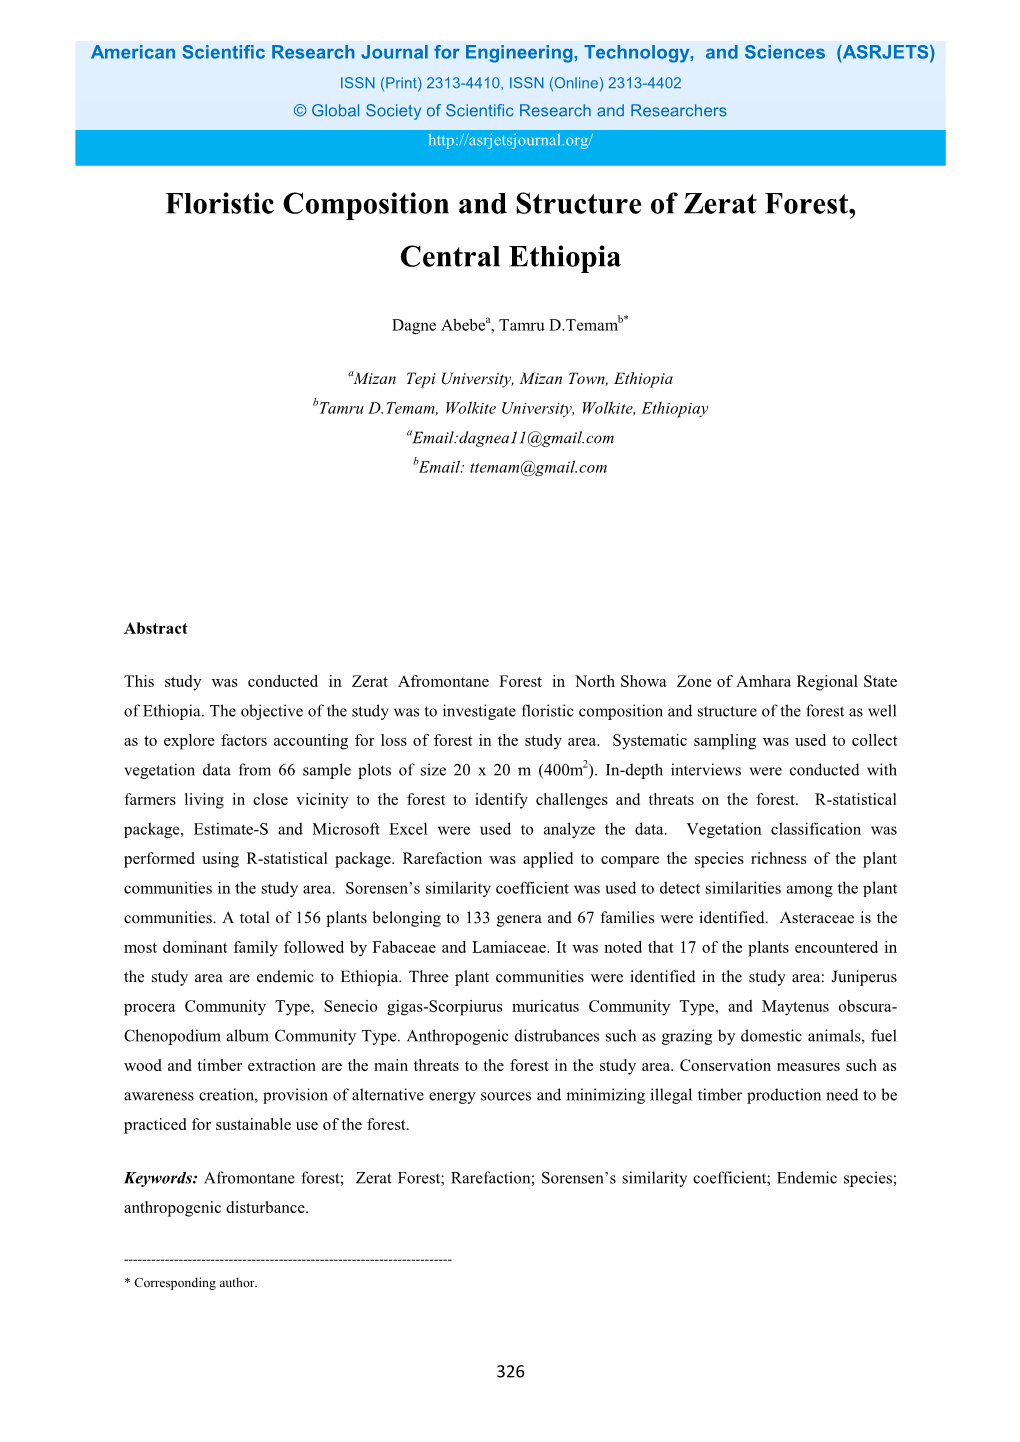 Floristic Composition and Structure of Zerat Forest, Central Ethiopia